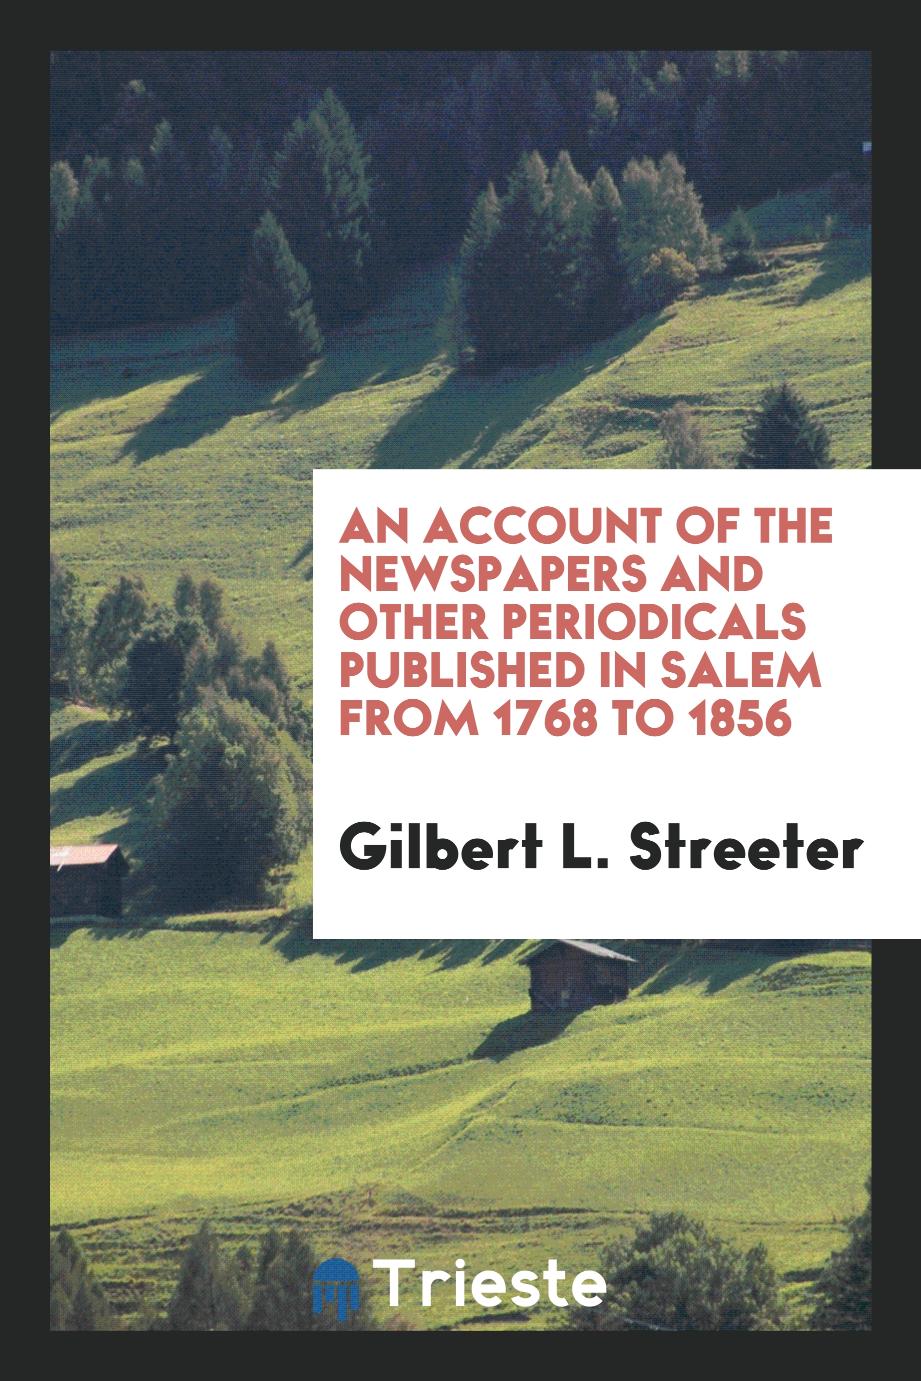 An Account of the Newspapers and Other Periodicals Published in Salem from 1768 to 1856